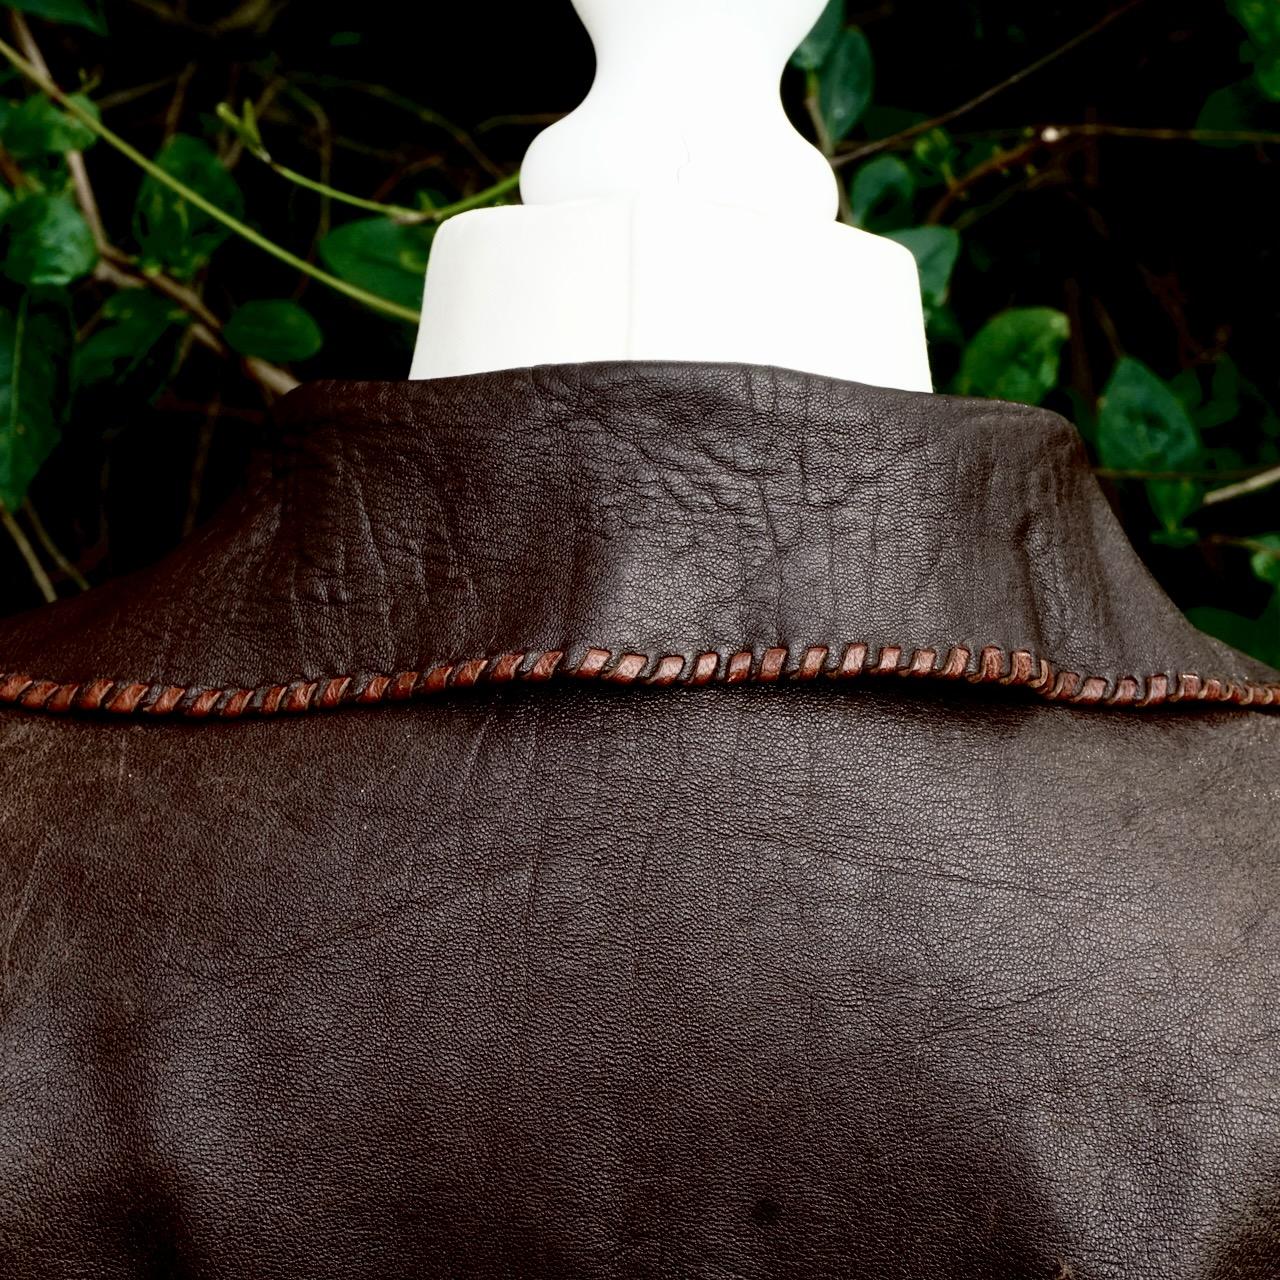 Soft Brown Leather Fringed Top from Lord John of Carnaby Street, London, 1960s For Sale 3